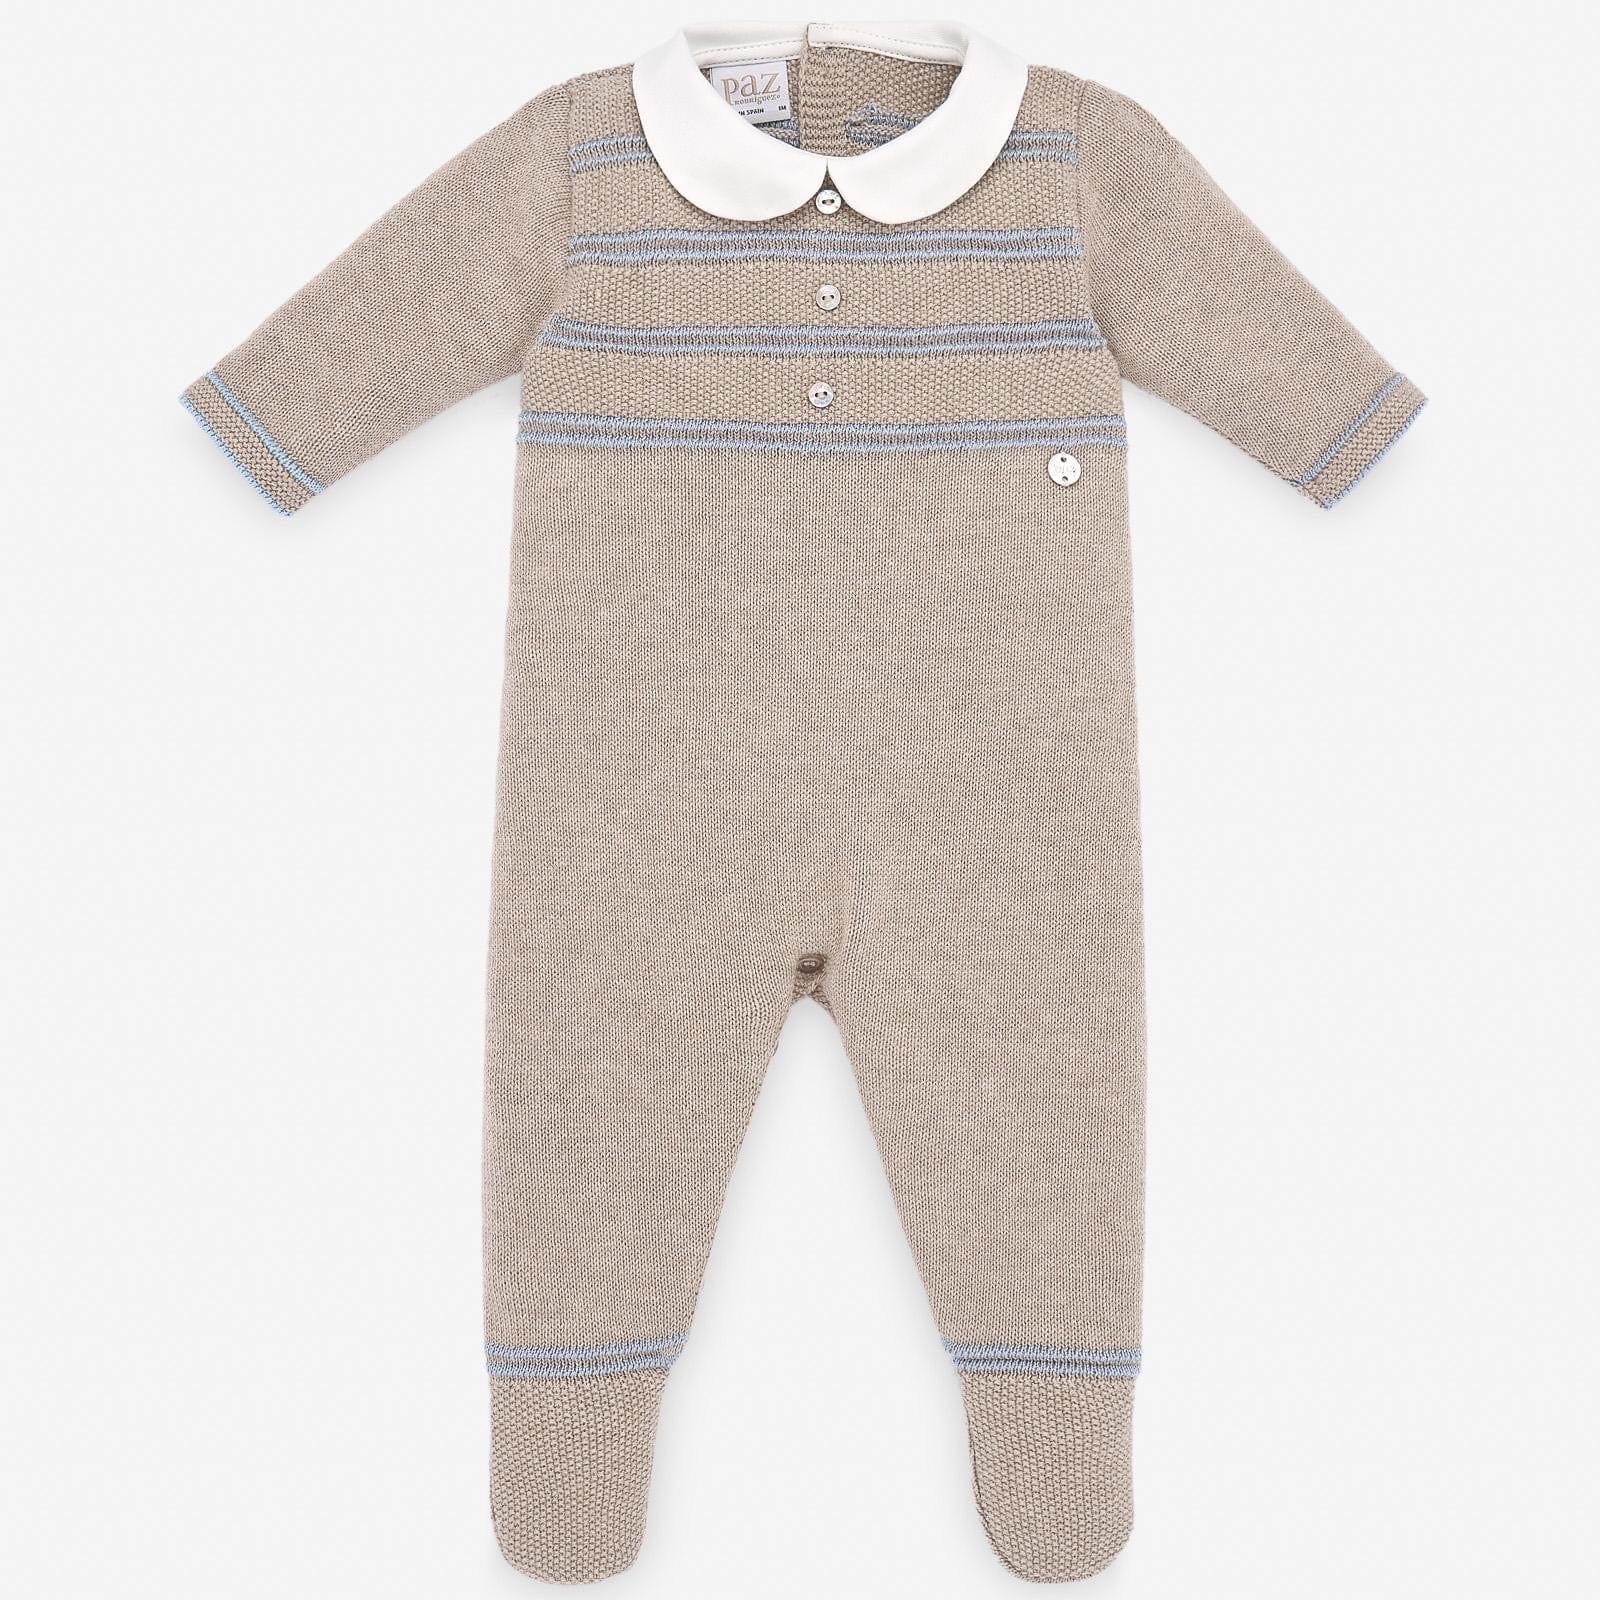 PAZ RODRIGUEZ - Knitted  Babygrow - Brown